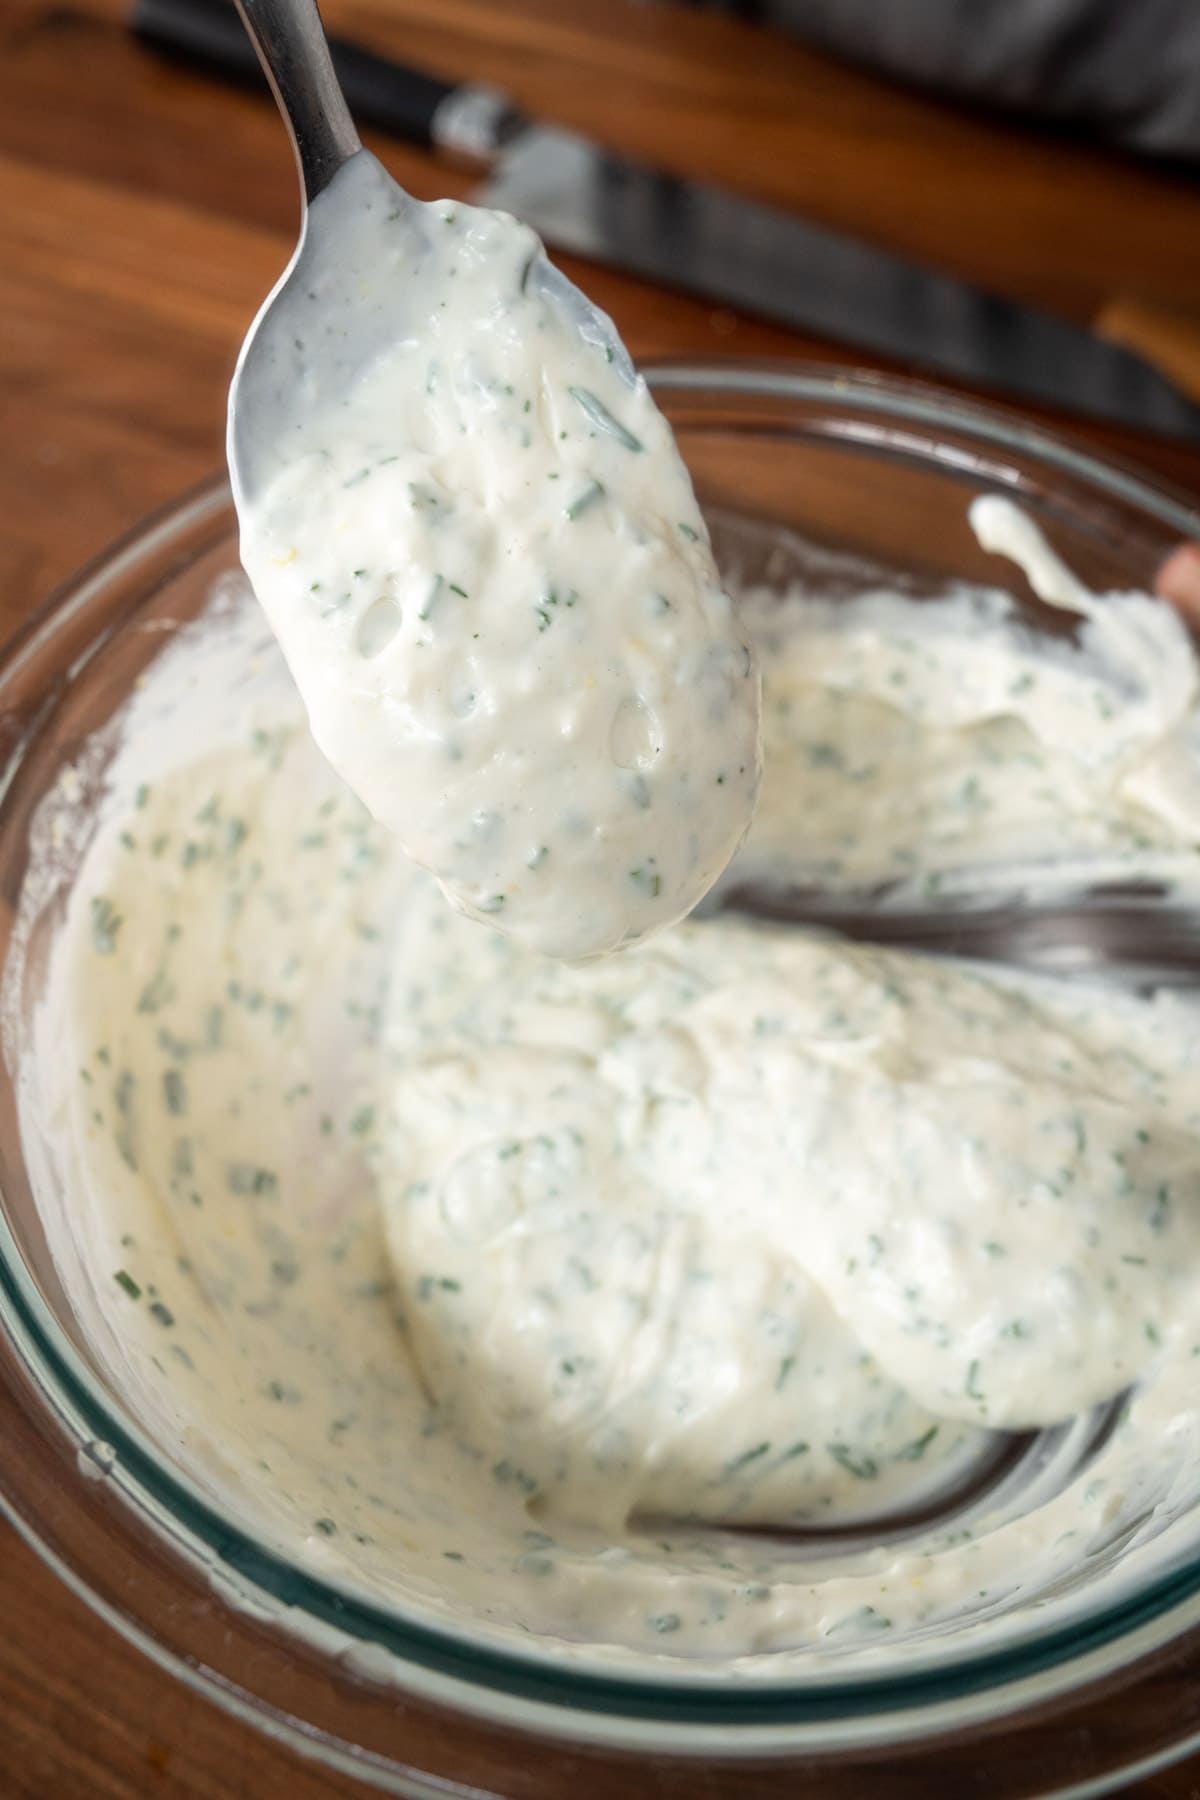 mixed garlic-dill yogurt sauce on a spoon showing its thicker consistency.